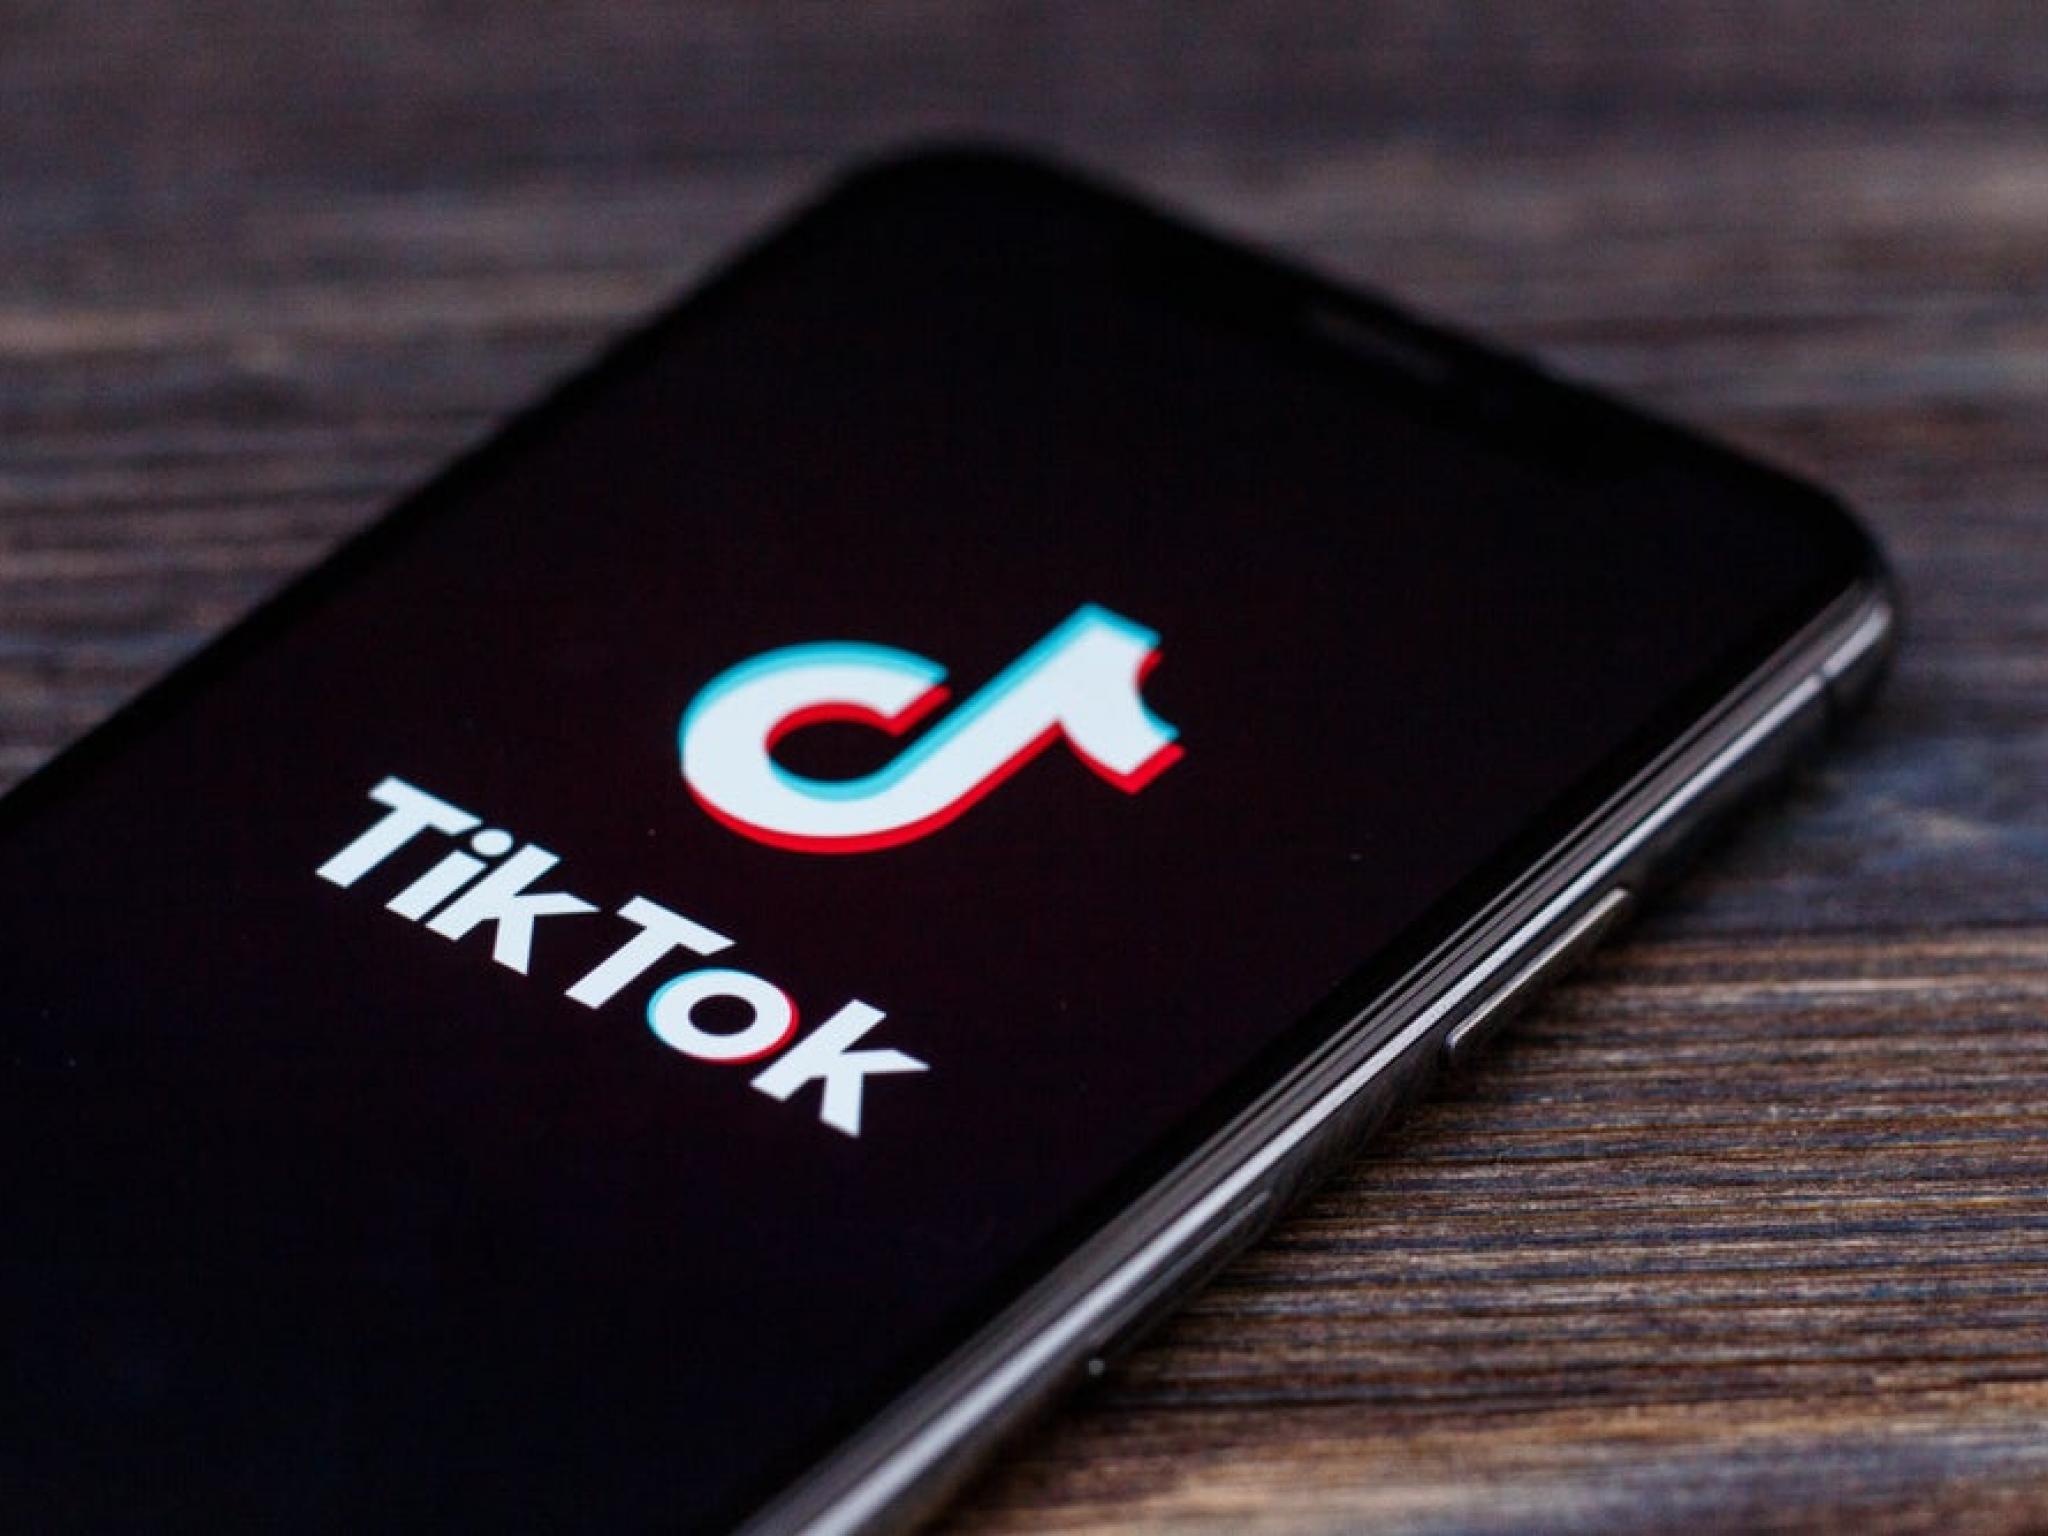  tiktok-argues-us-could-have-considered-alternatives-to-banning-app 